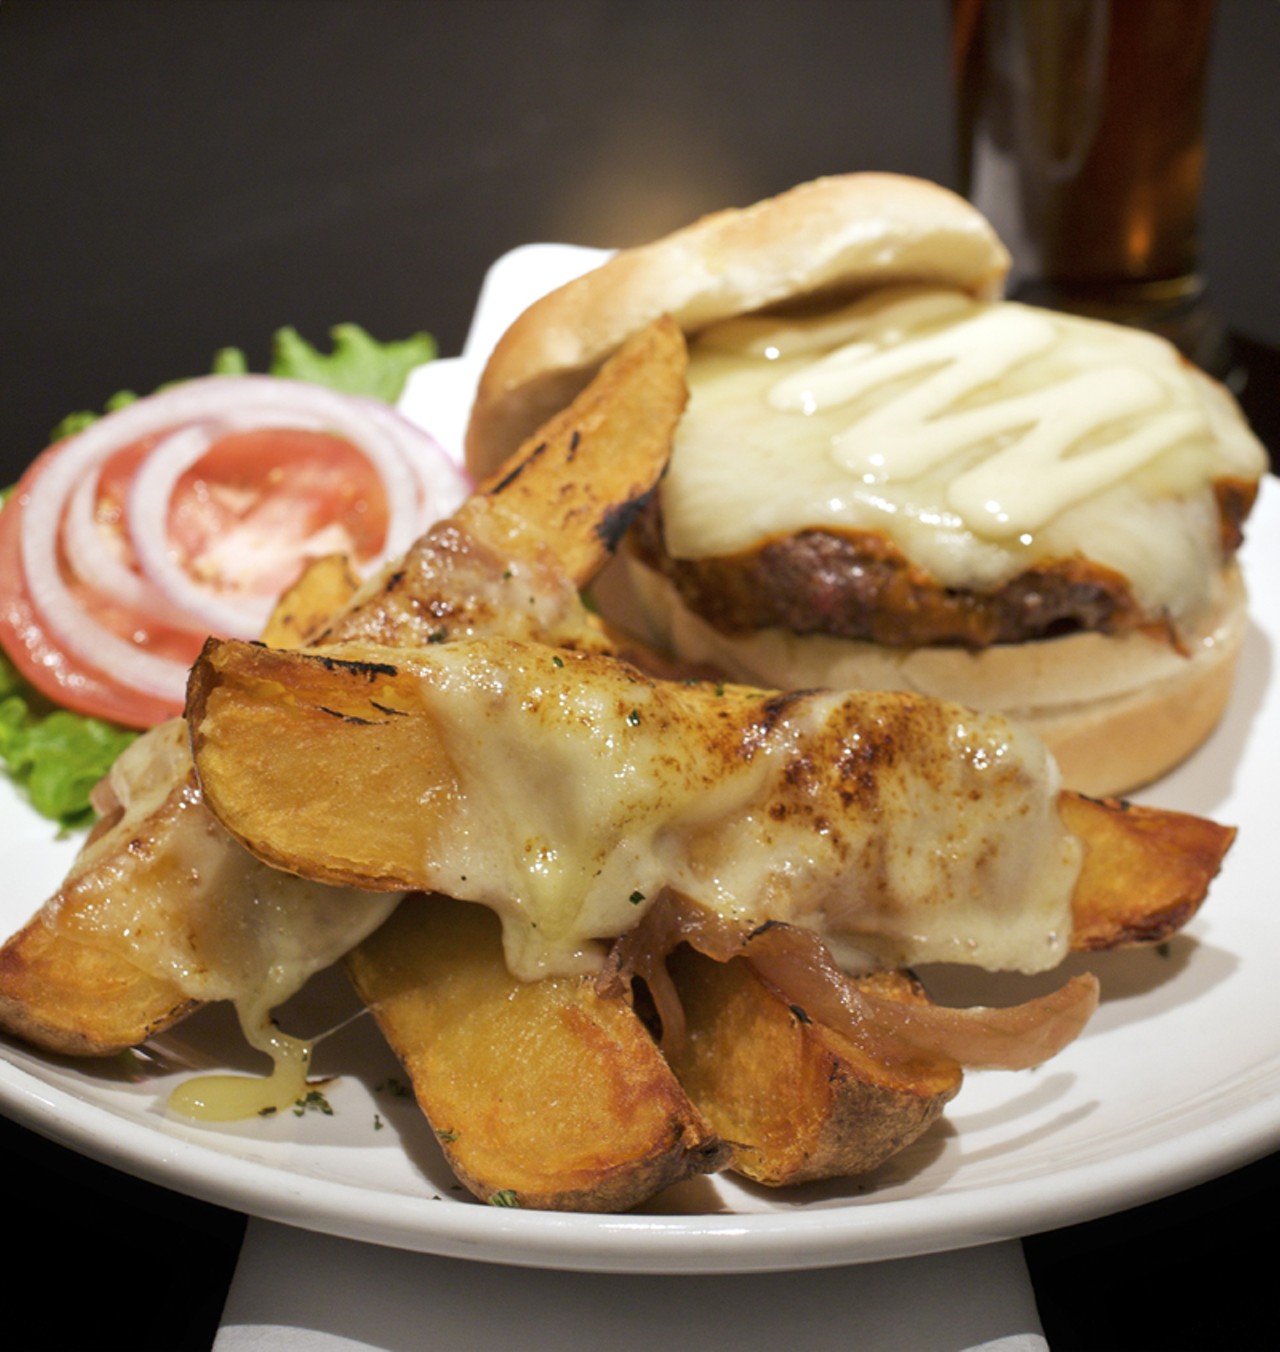 The buffalo-style burger is grilled and basted with a house sauce, Monterey Jack cheese and a house mayonnaise. And is shown here with French Onion steak fries, which Jeff tells us has not been a regular offering, but after this photo shoot, will probably become one.